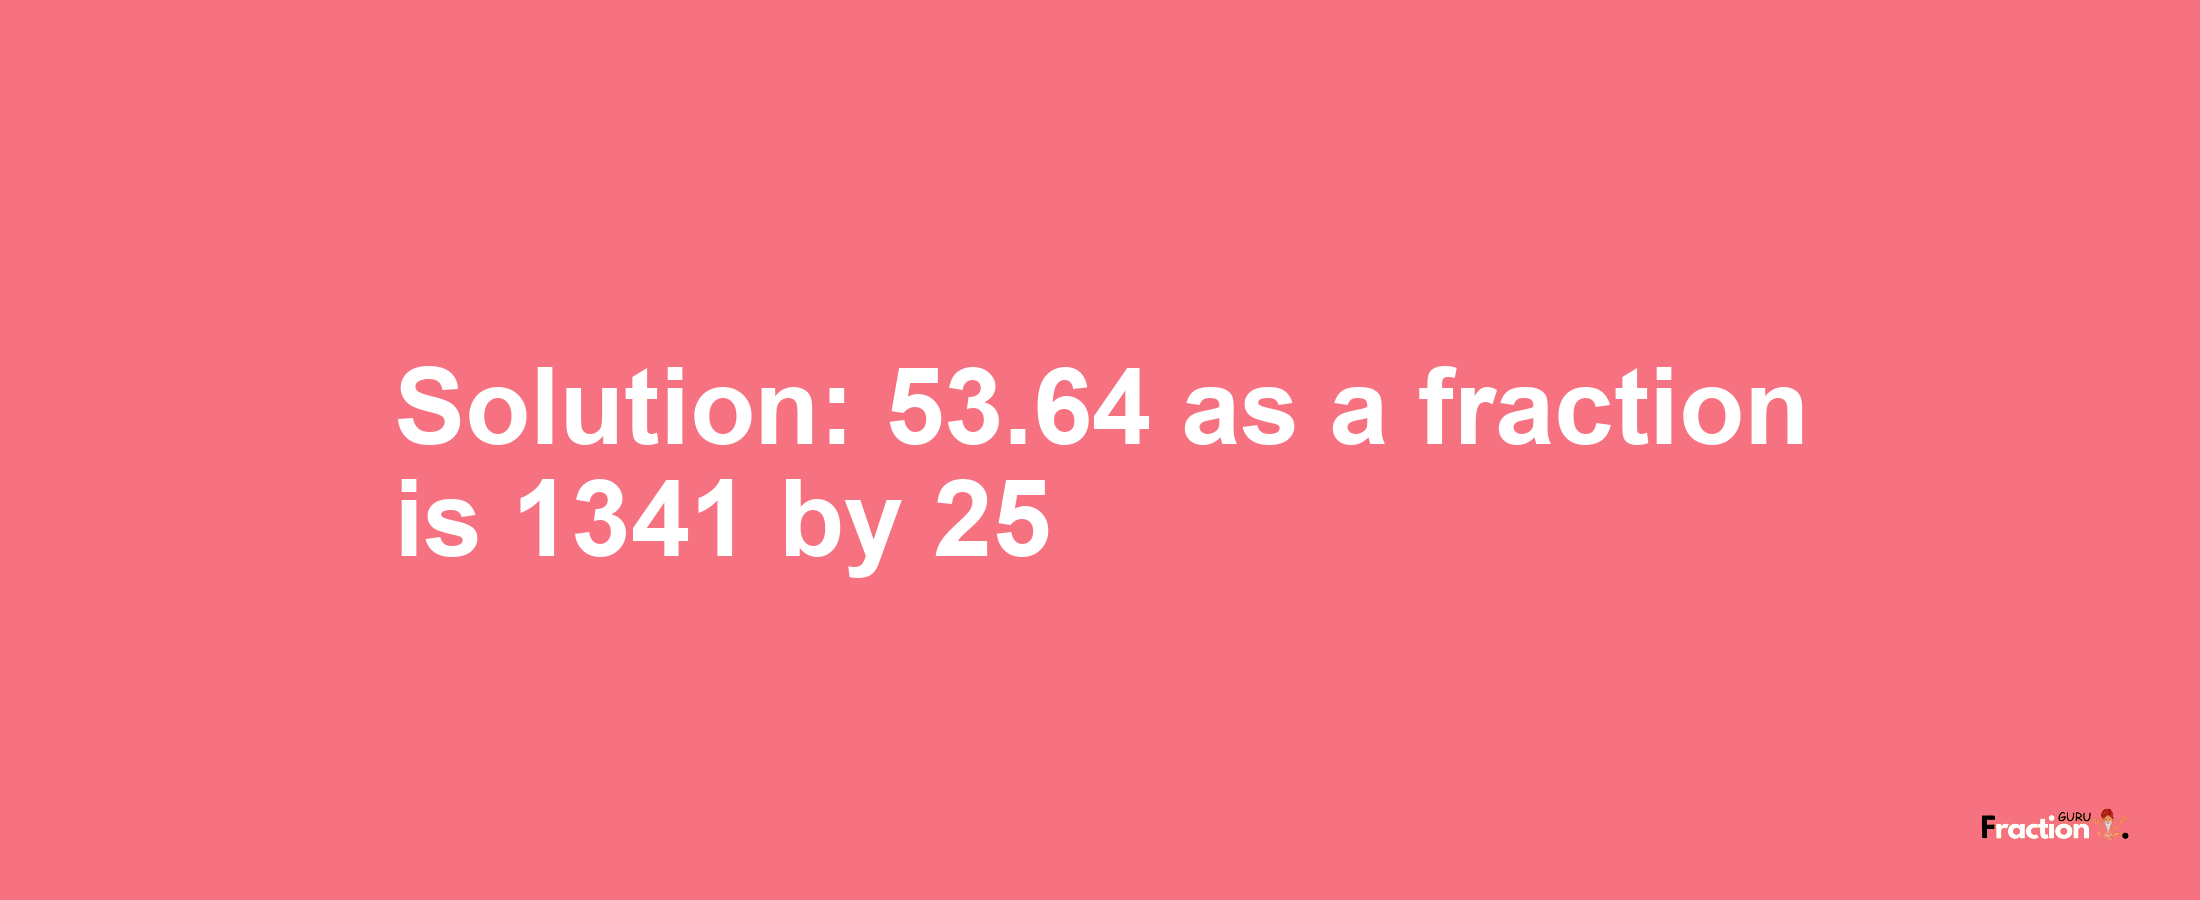 Solution:53.64 as a fraction is 1341/25